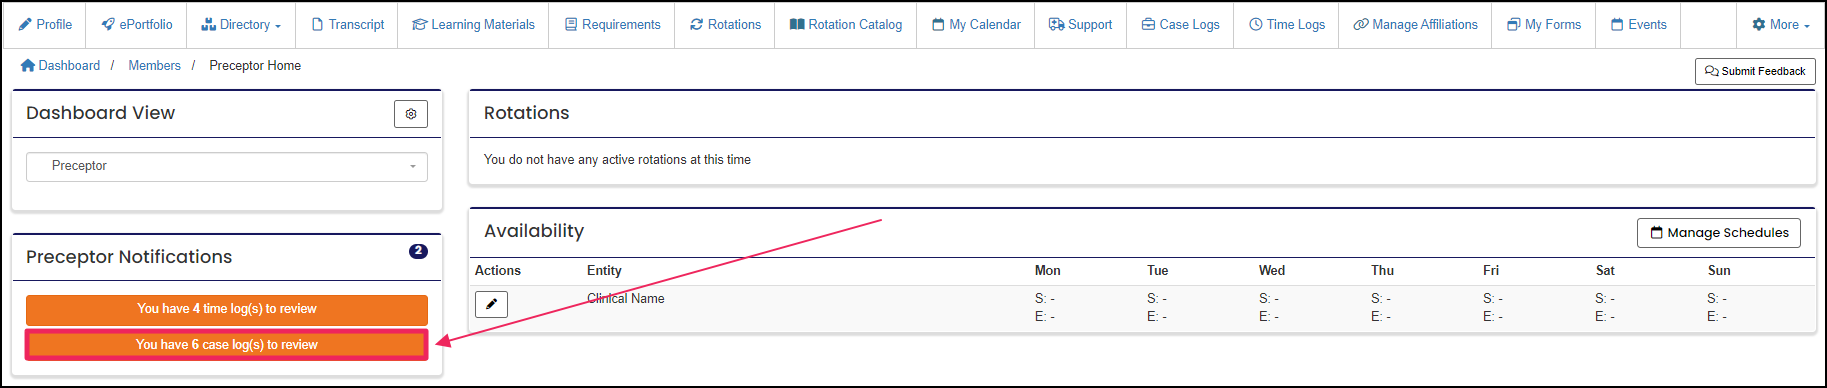 Image pointing to Manage Case Logs button in Preceptor Notifications section